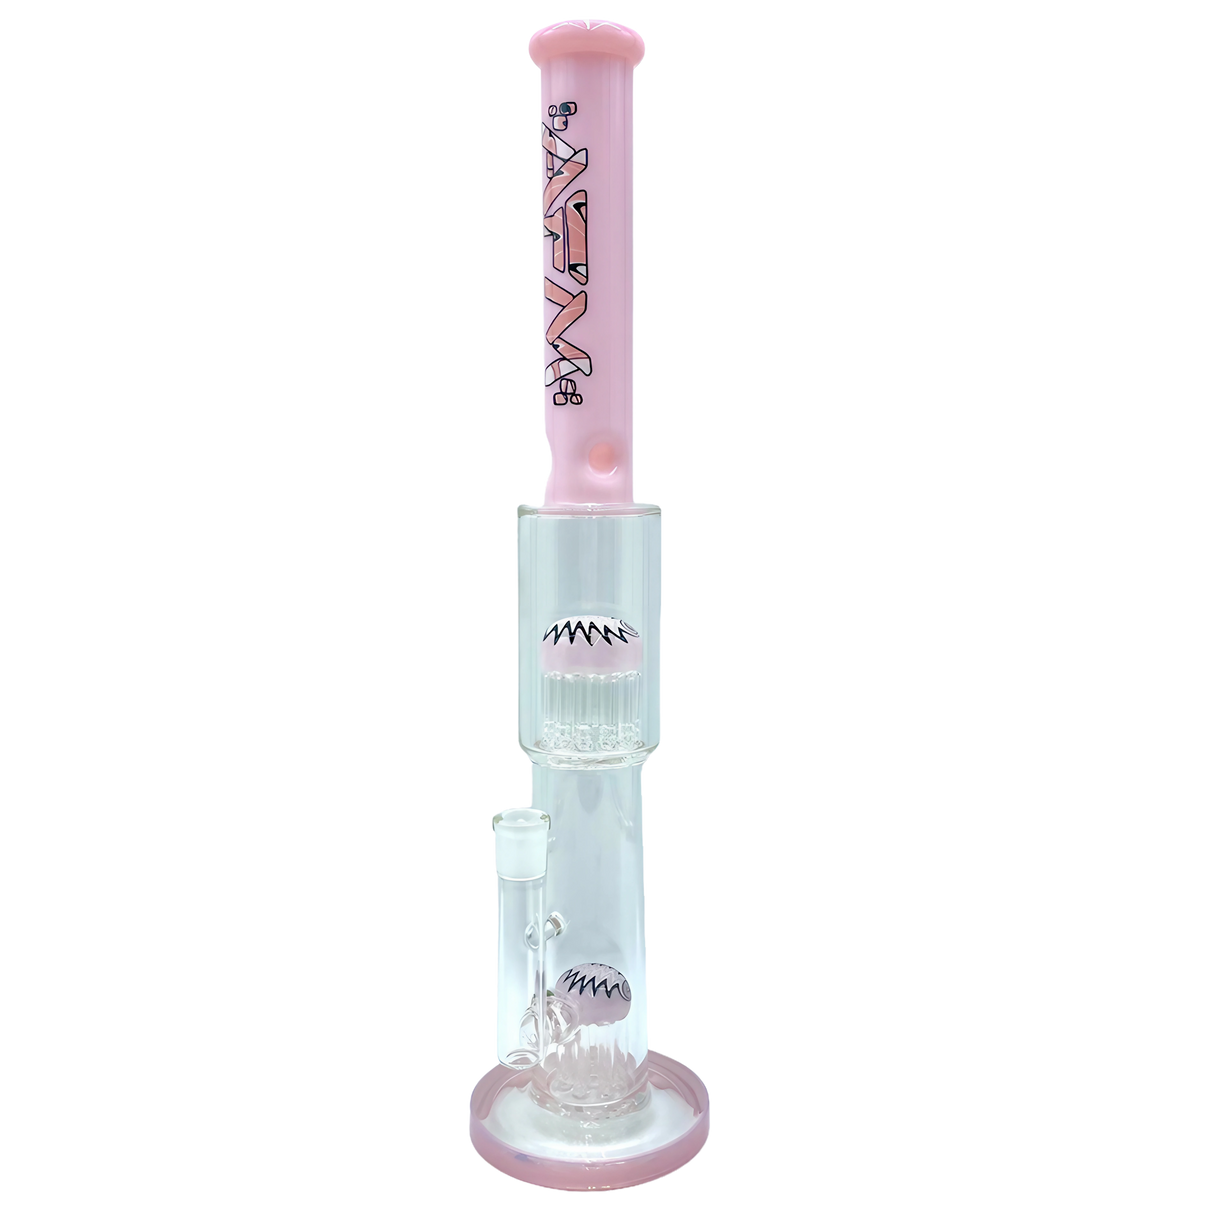 AFM The Double Hitter Reversal 19" Bong in Pink - Front View with Intricate Glasswork